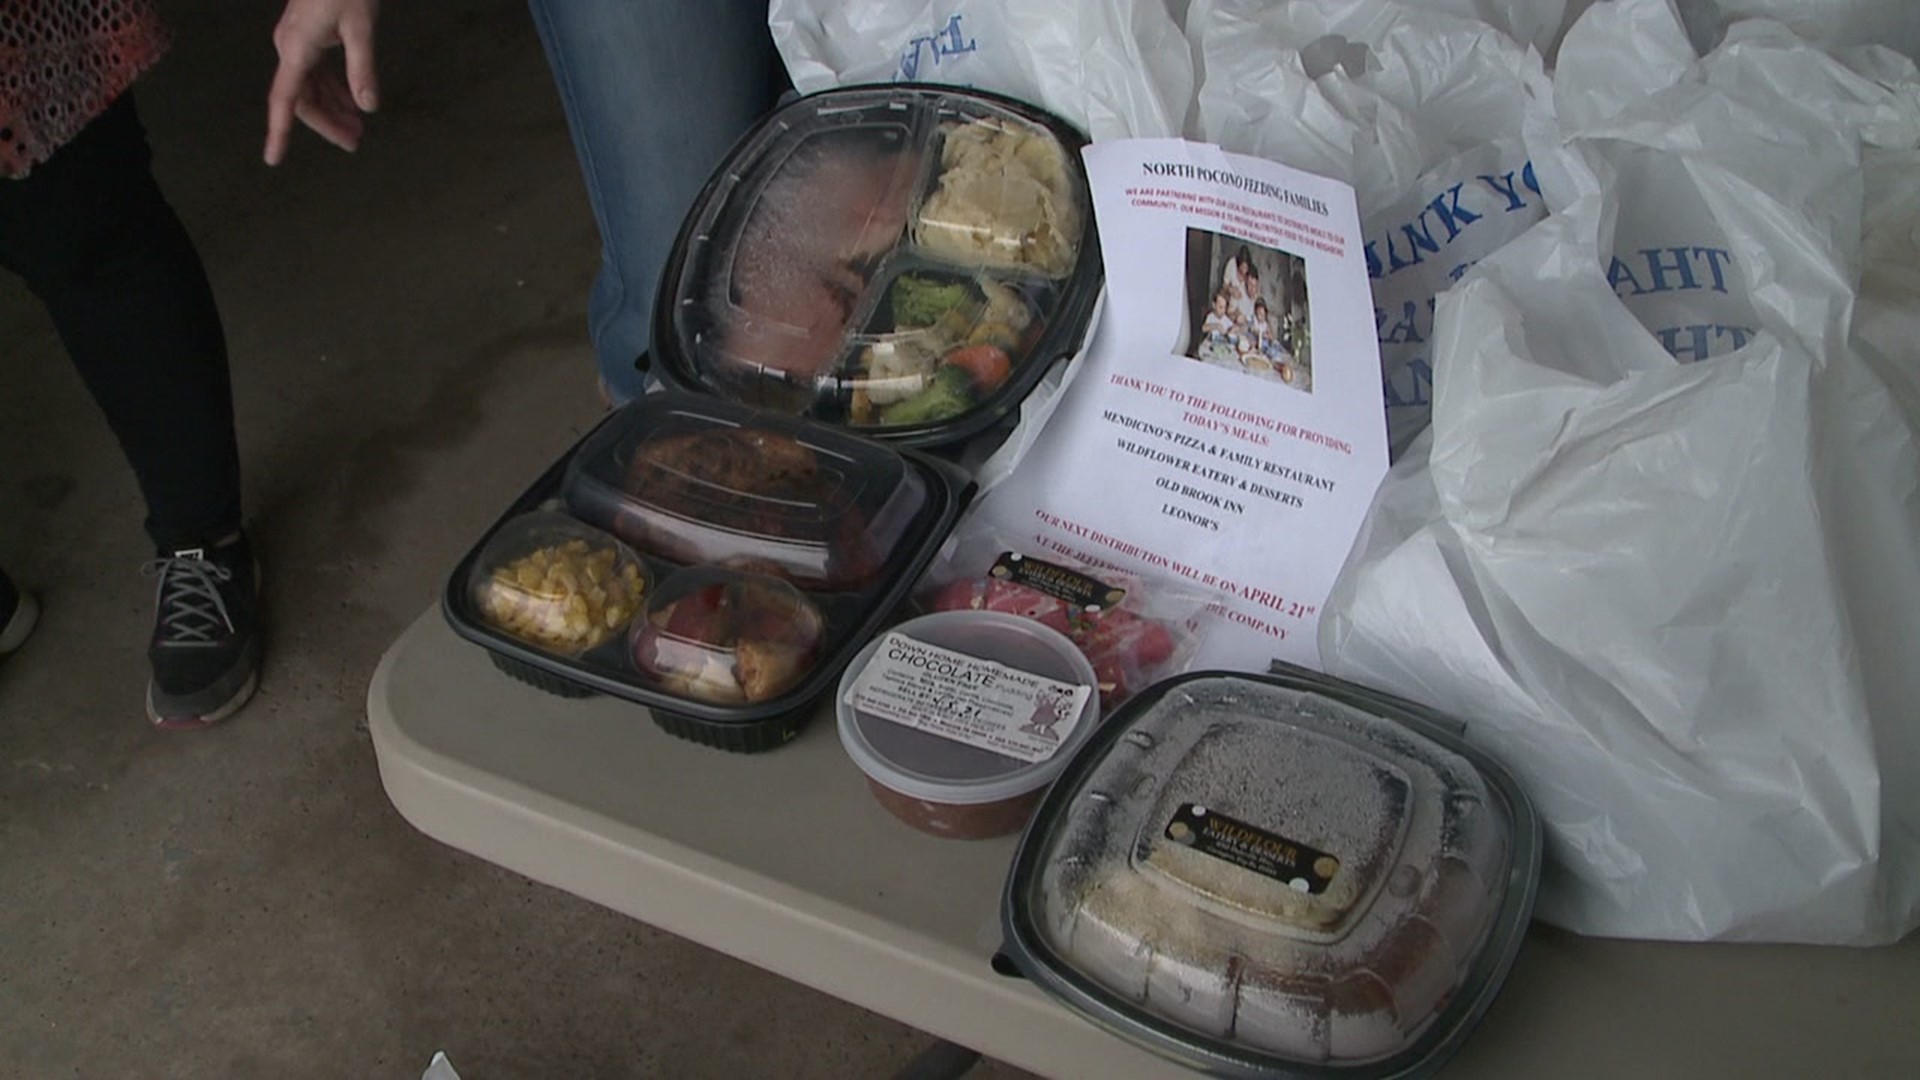 Several restaurants provided the meal for free at the Covington Independent Fire Company.